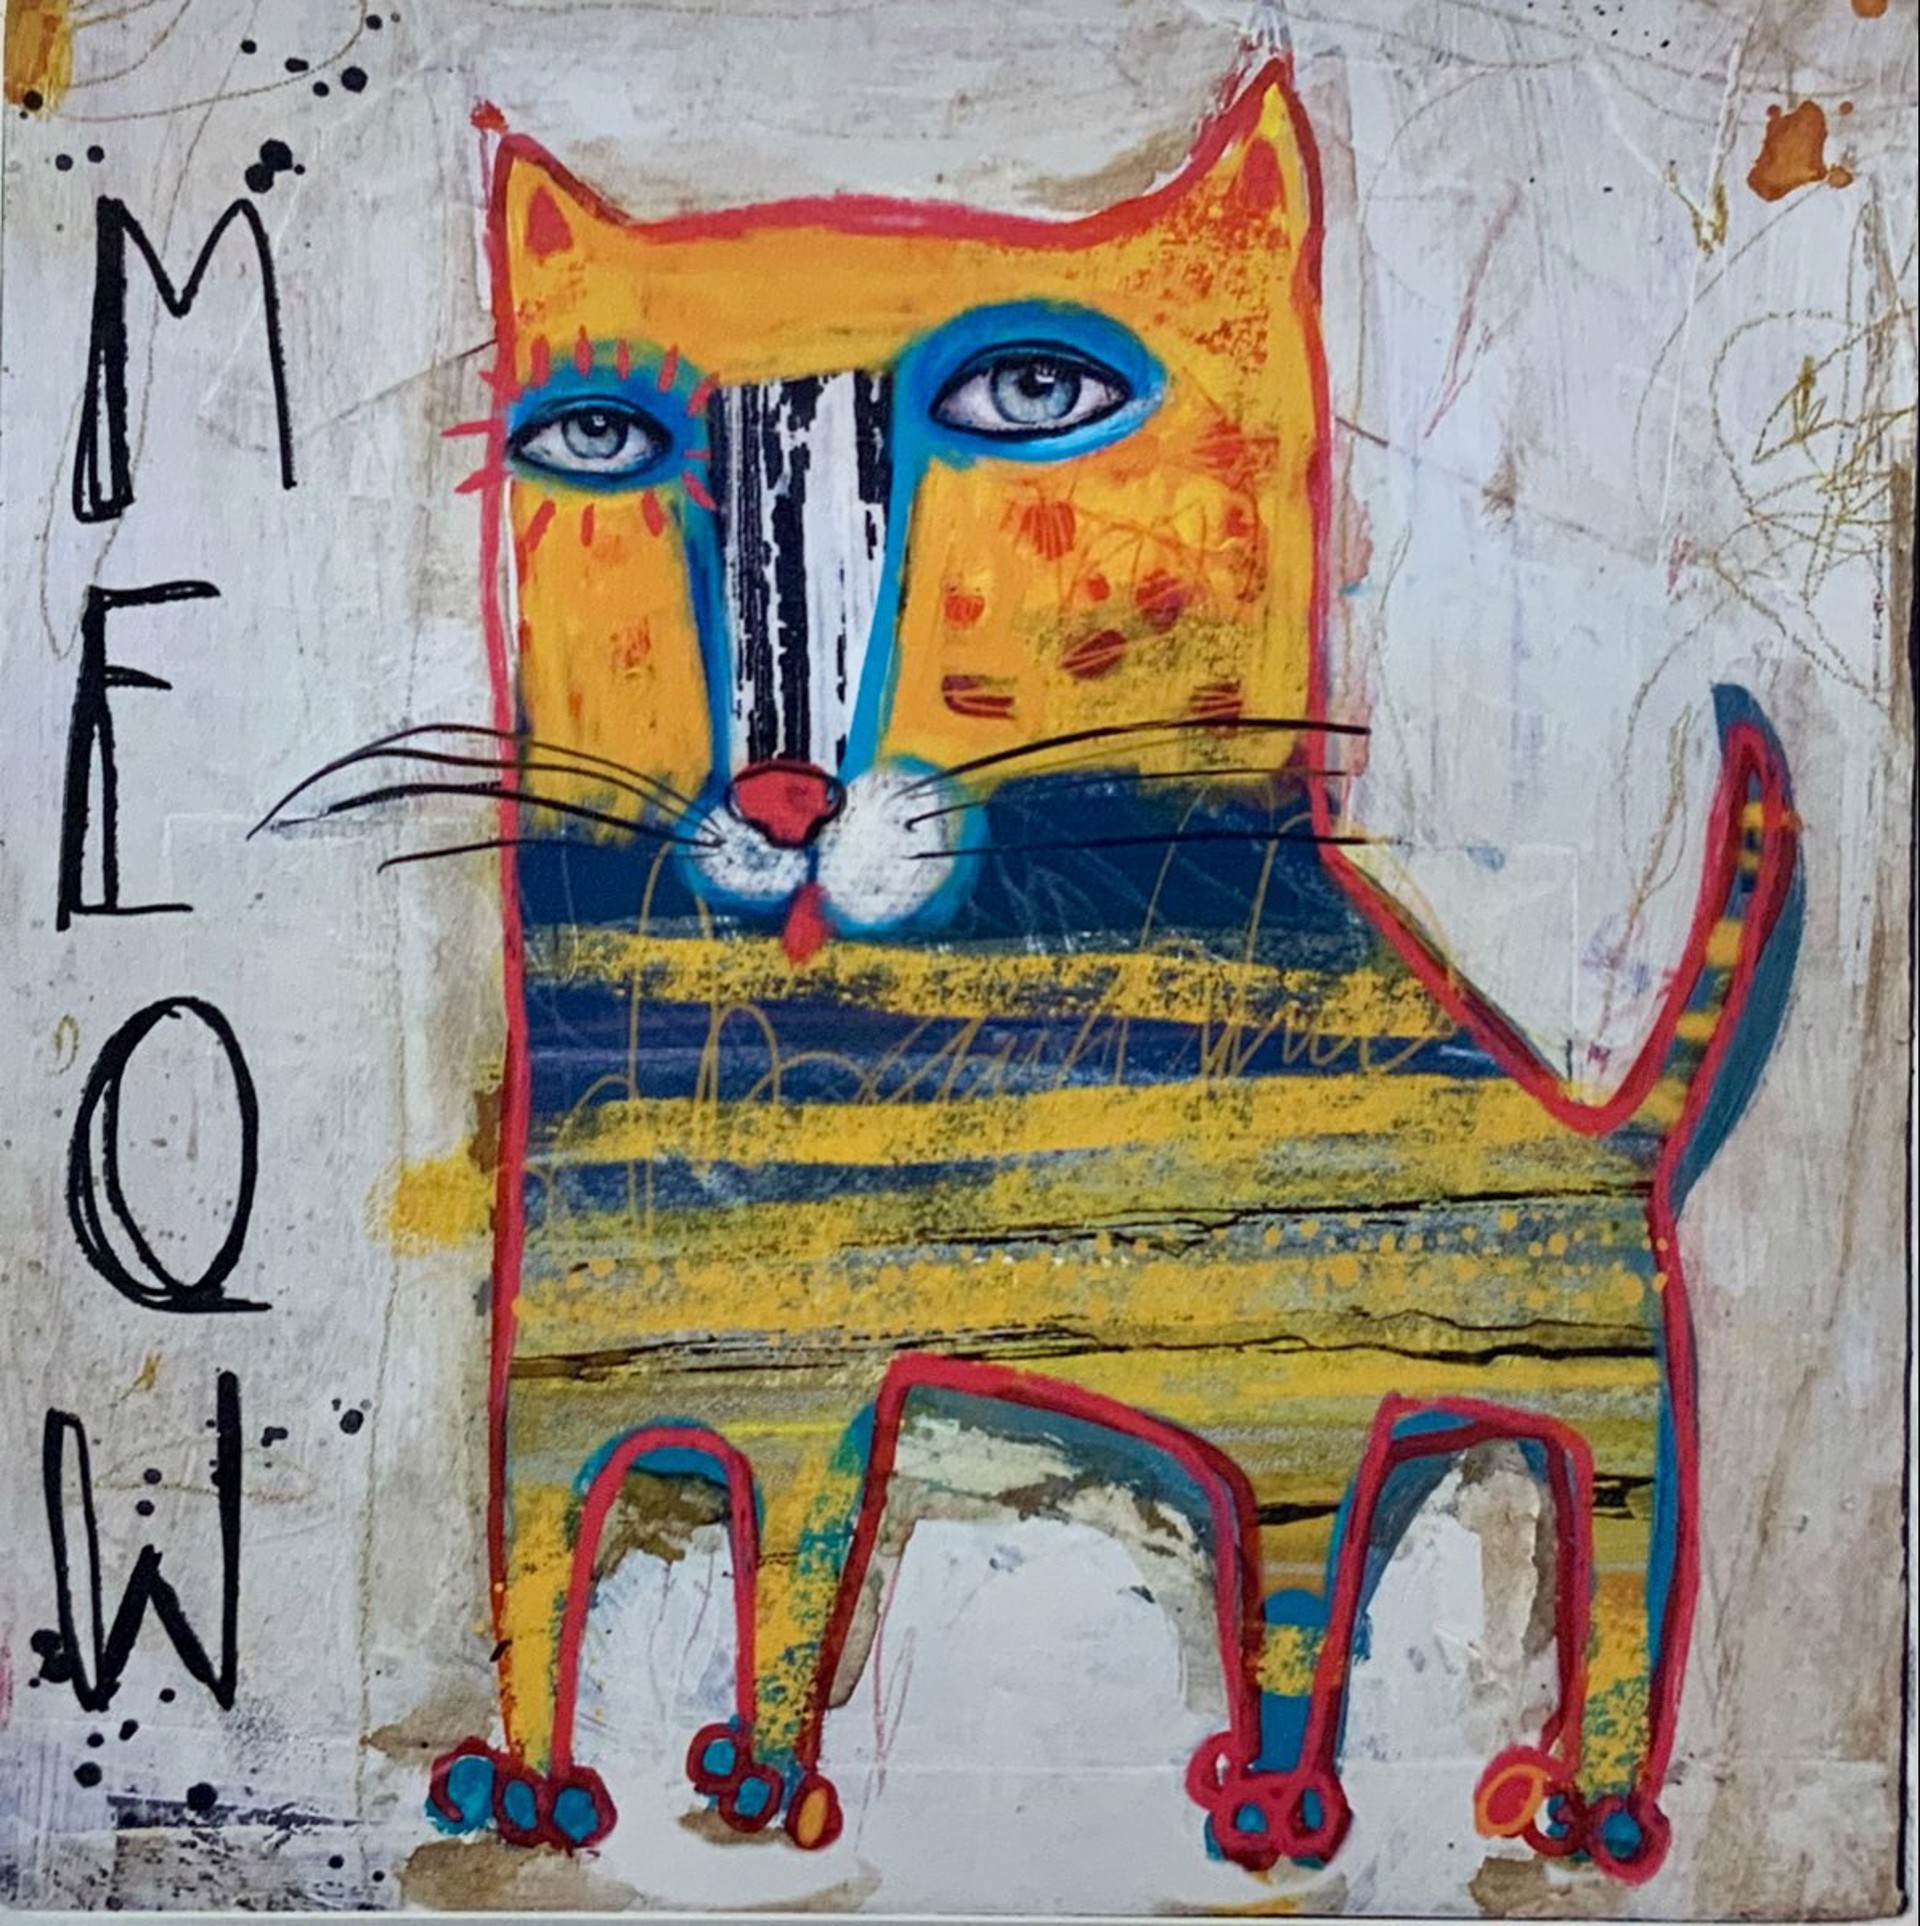 Meow by Jacqui Fehl